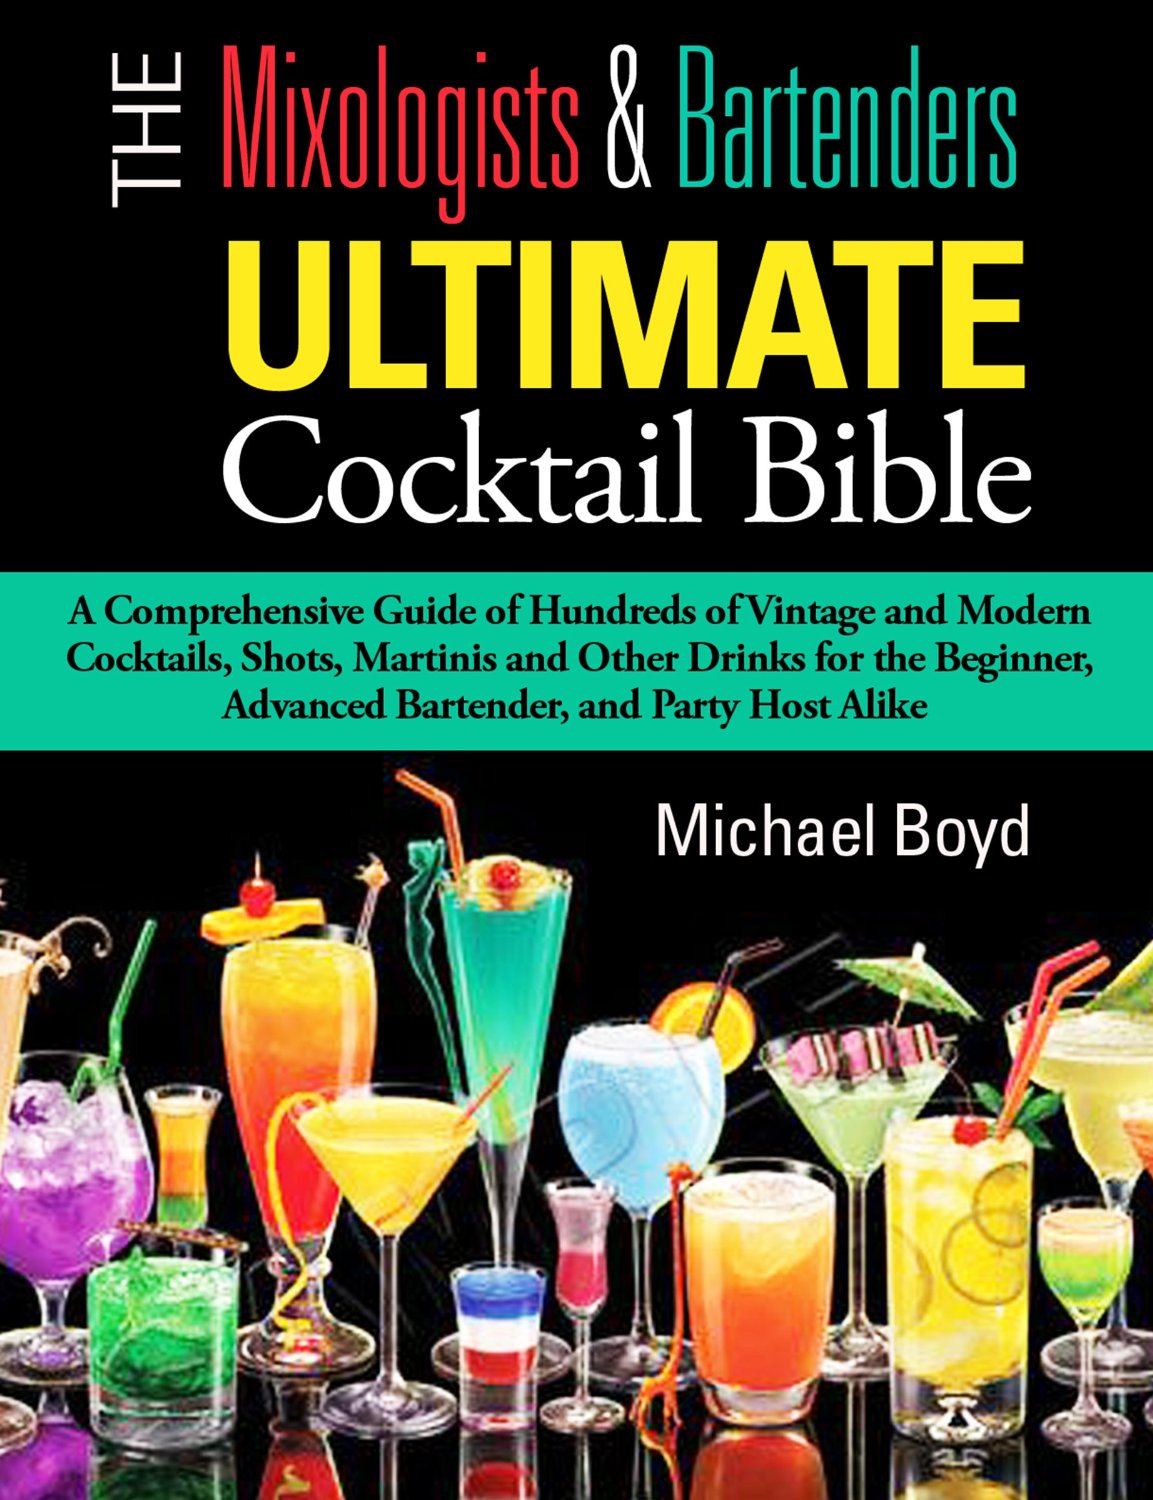 The Mixologist’s and Bartender’s Ultimate Cocktail Bible: A comprehensive guide of hundreds of vintage and modern cocktails, shots, martinis and other drinks by Michael Boyd